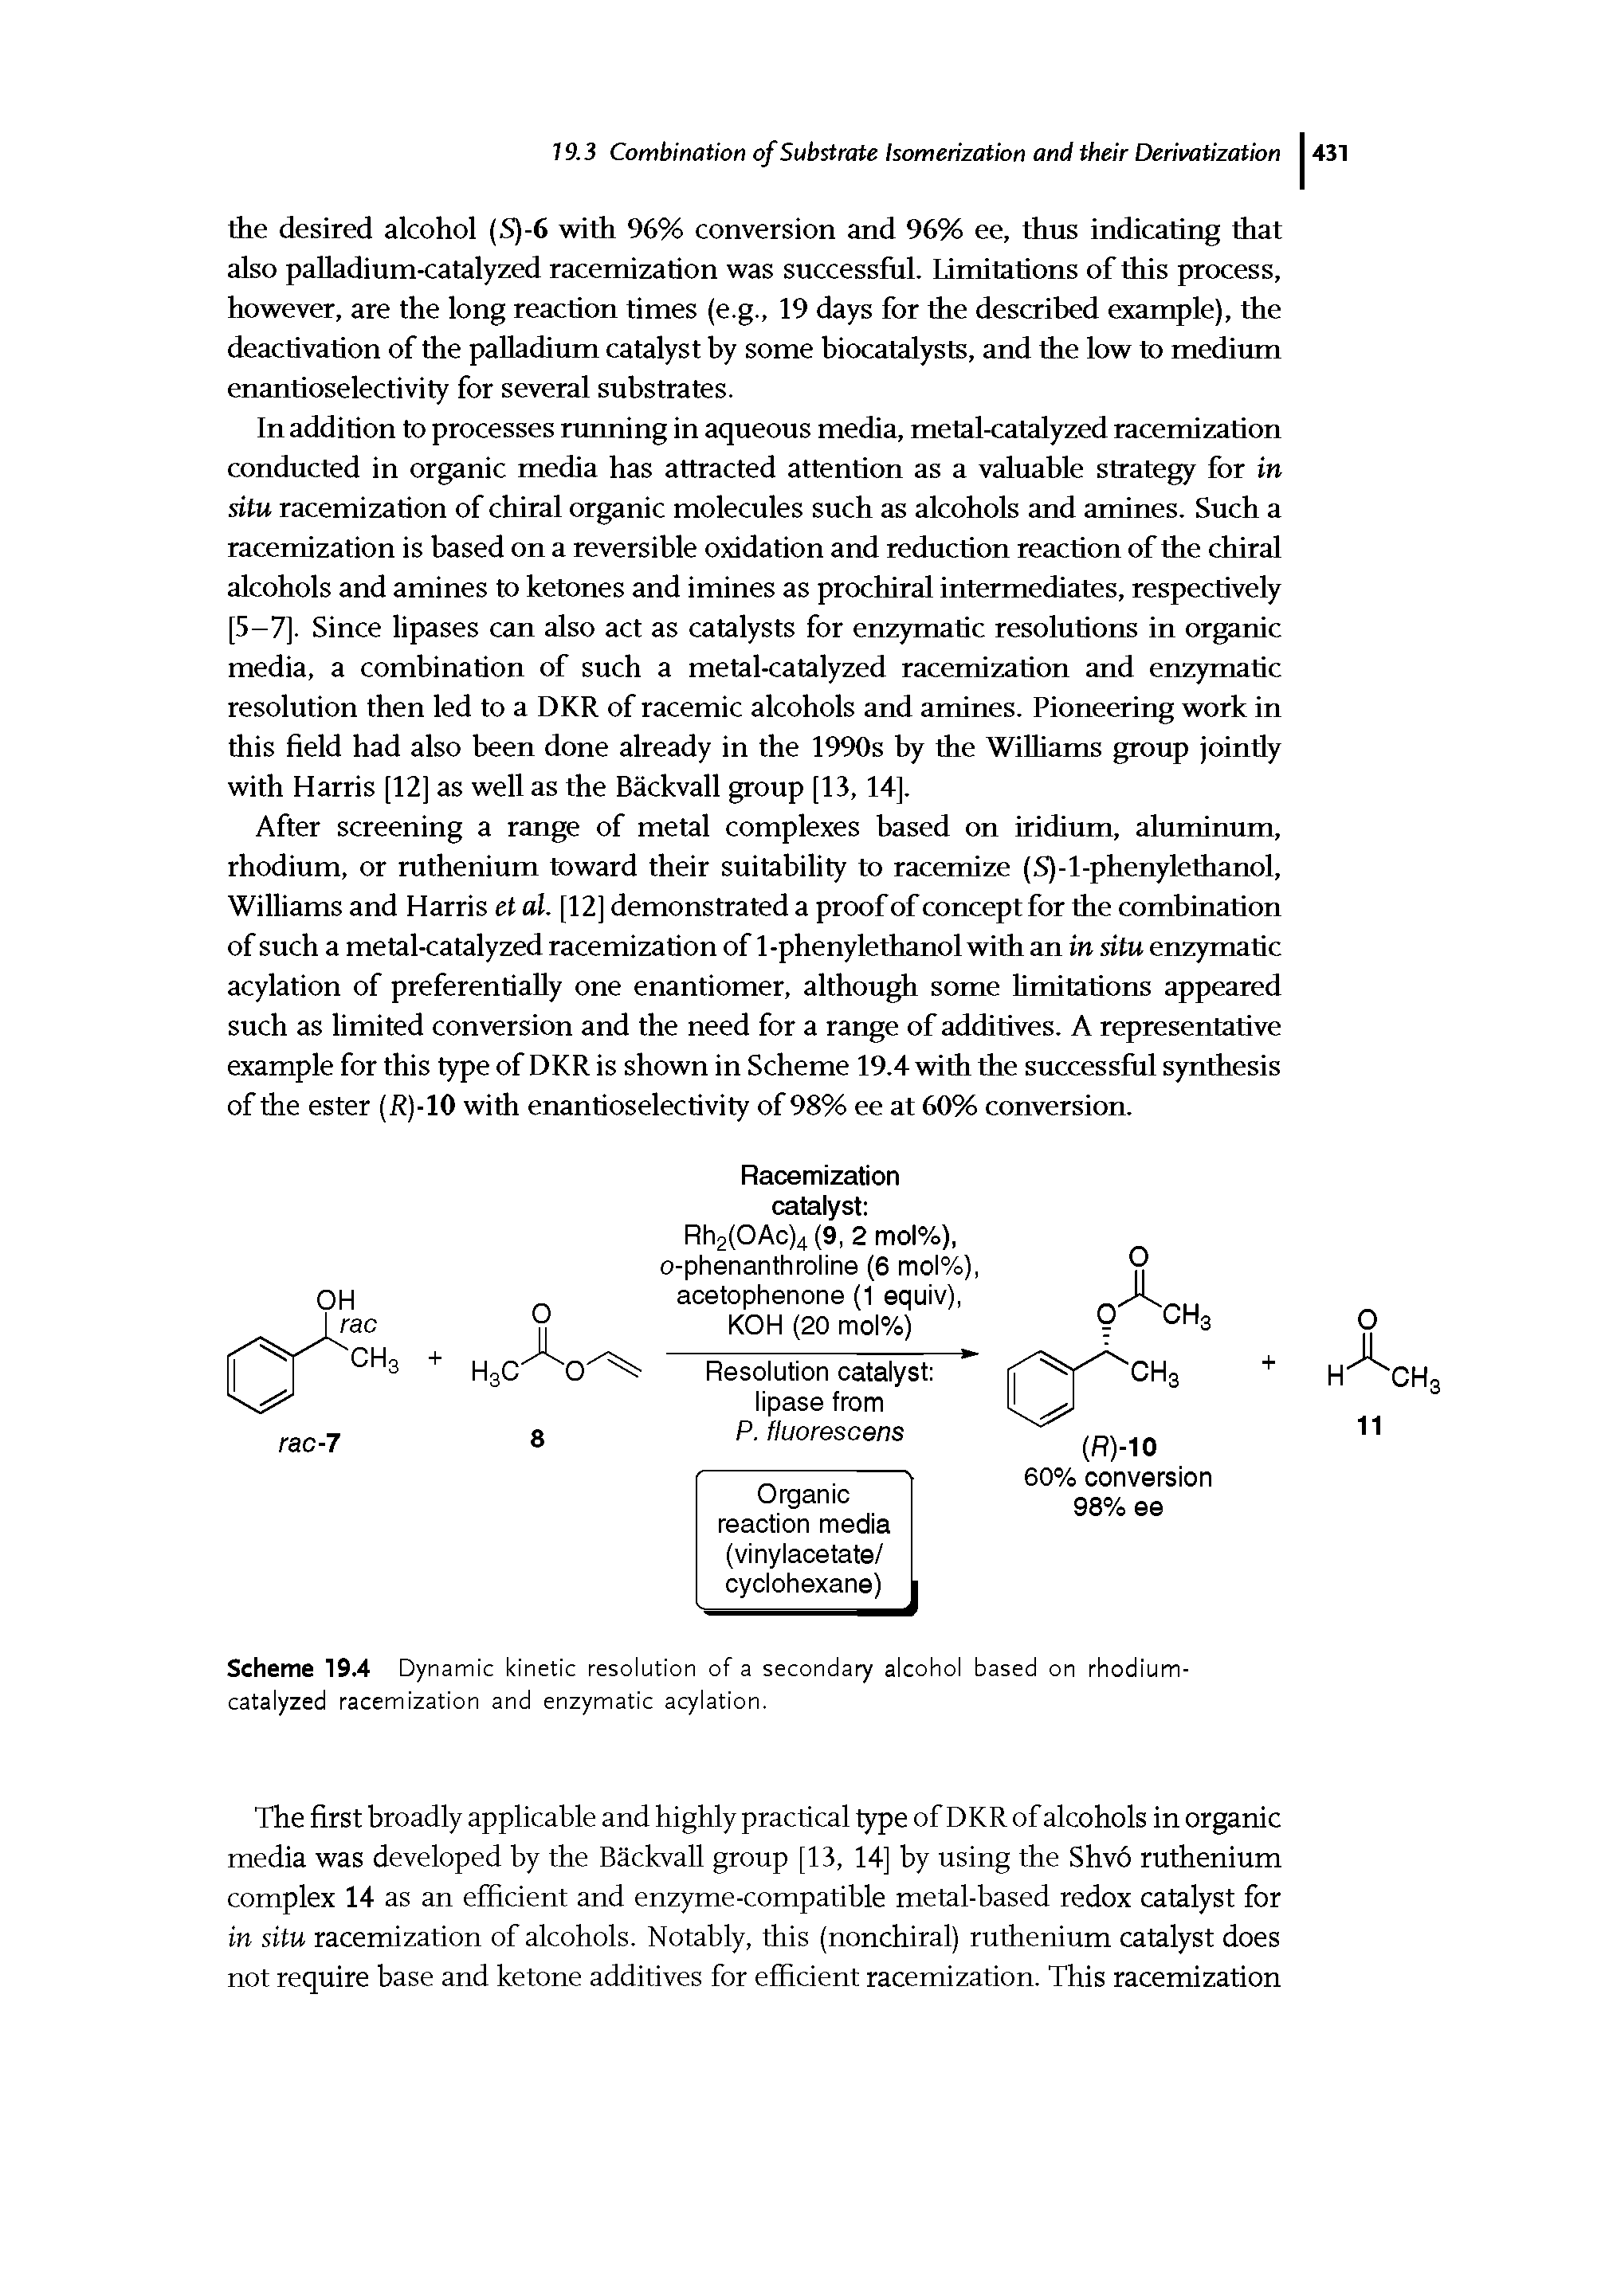 Scheme 19.4 Dynamic kinetic resolution of a secondary alcohol based on rhodium-catalyzed racemization and enzymatic acylation.